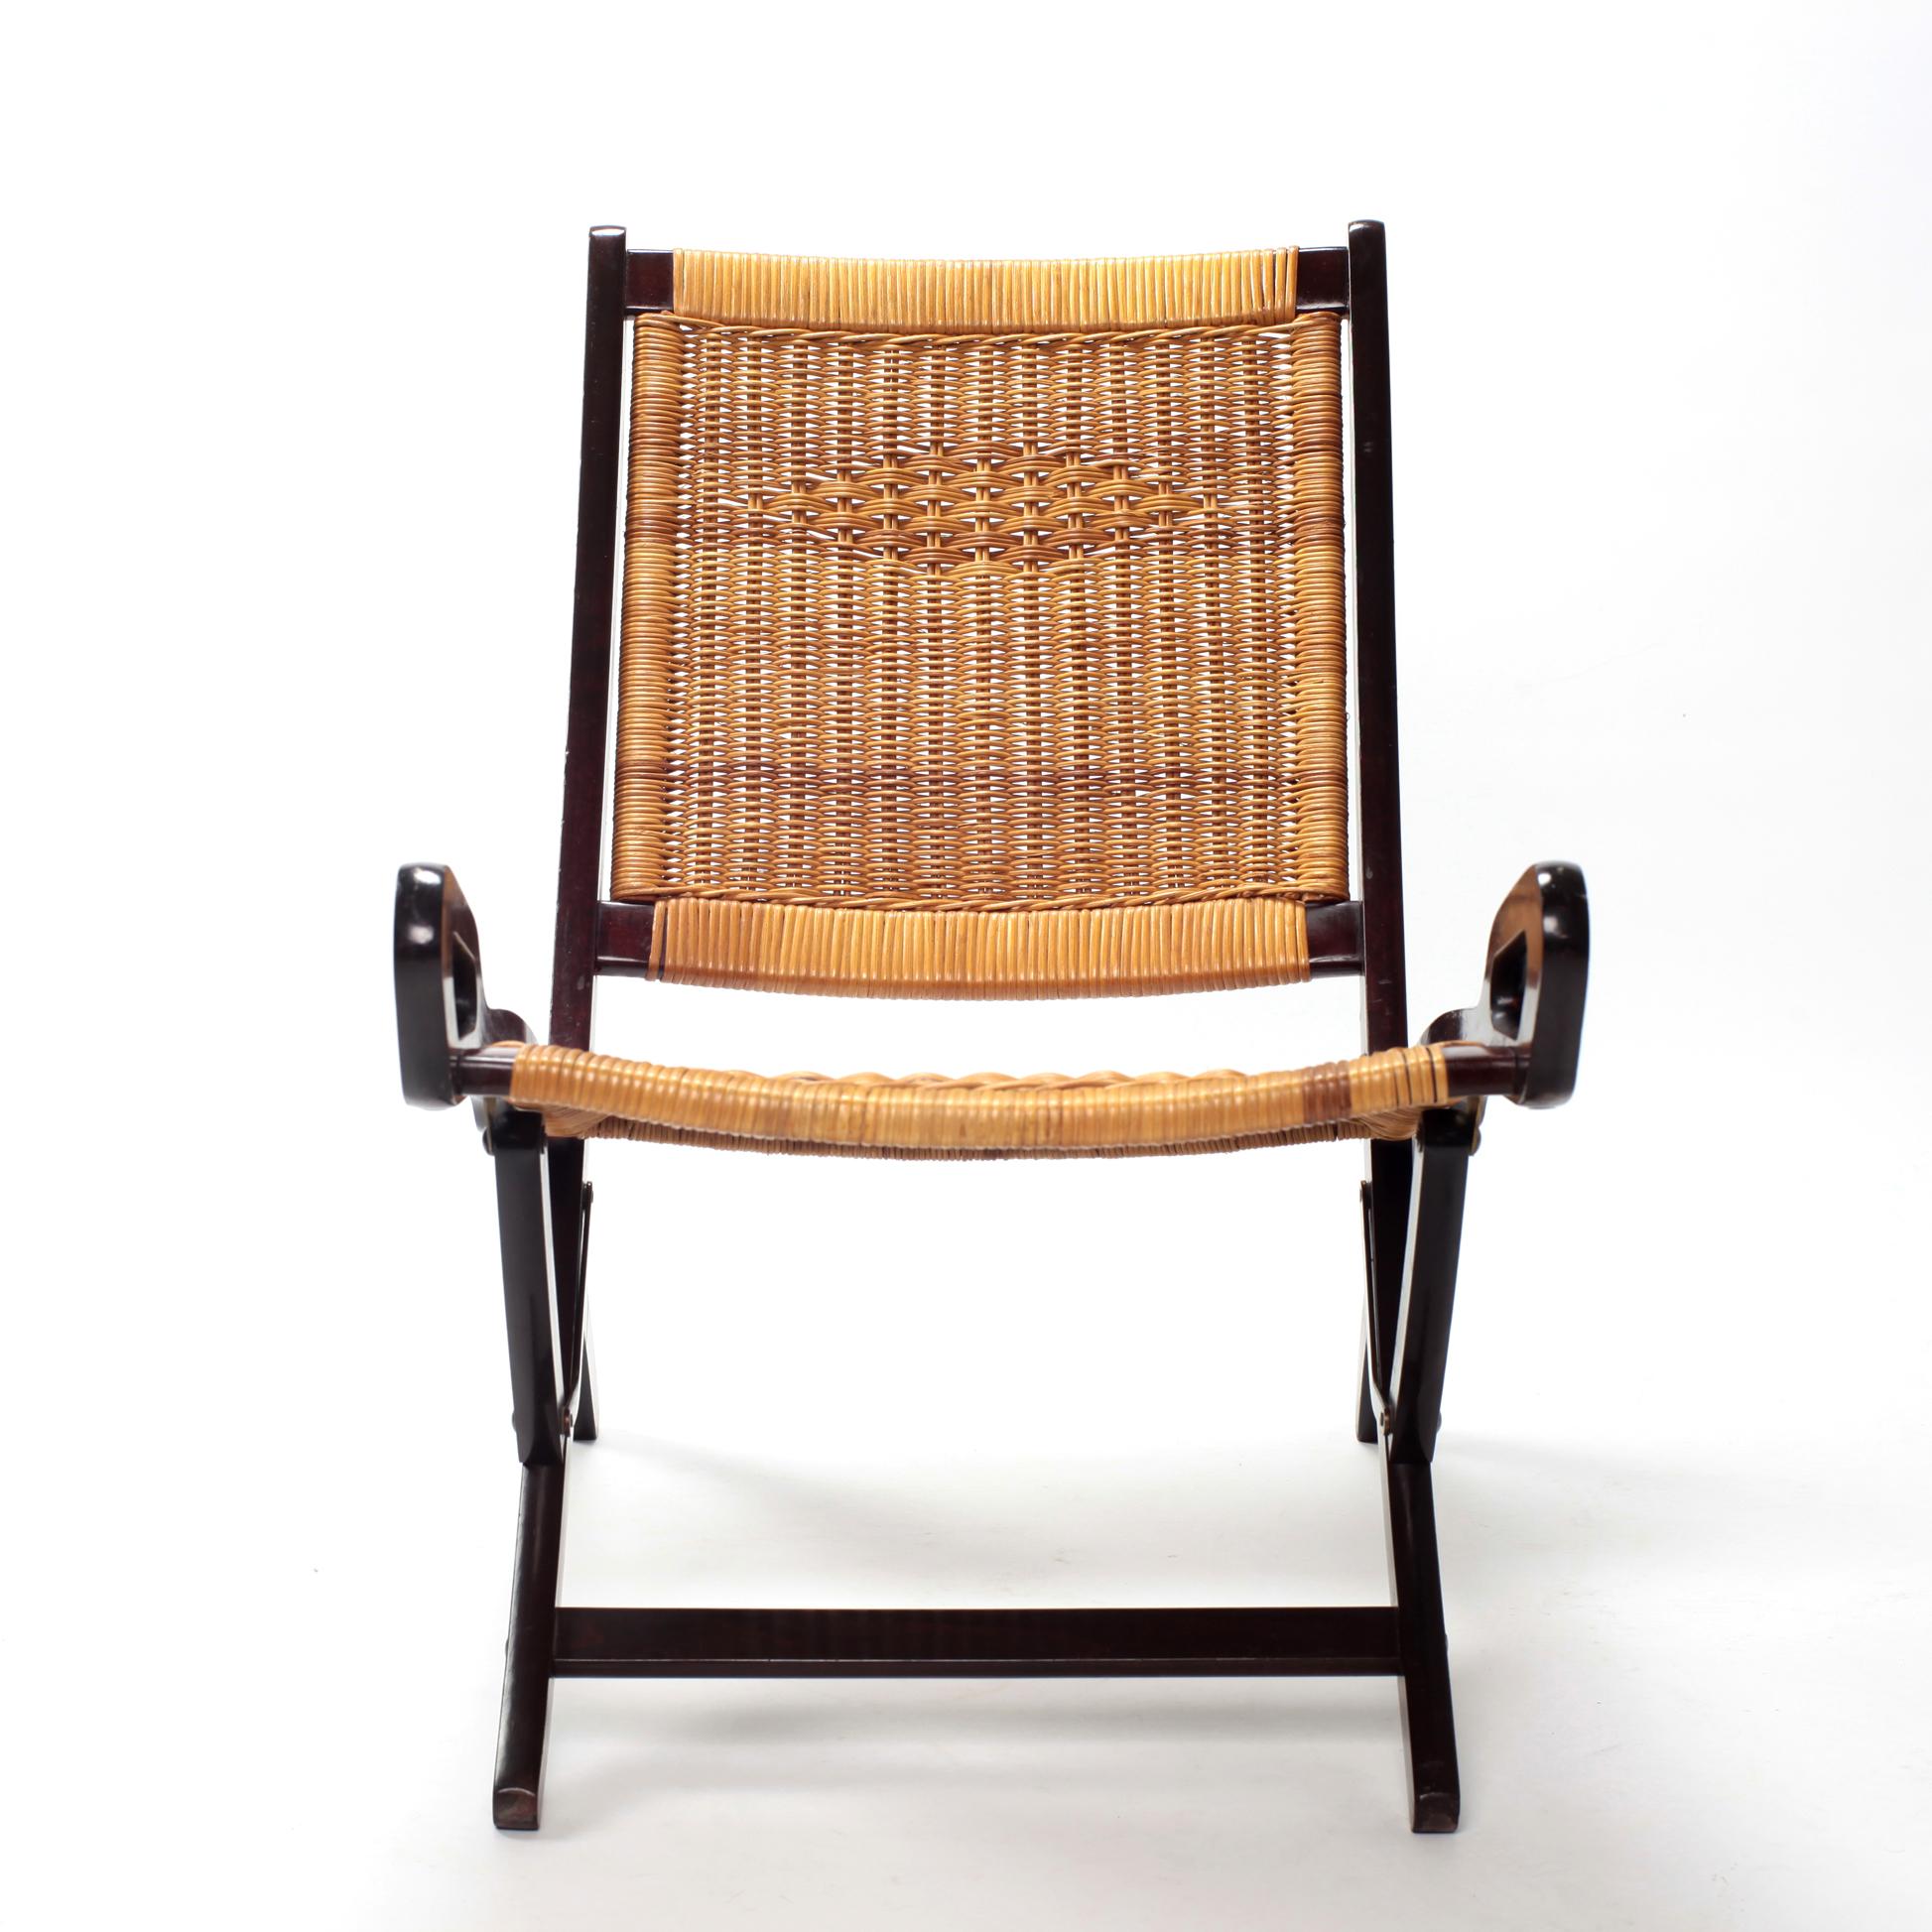 Rare Gio Ponti Ninfea folding chair for Fratelli Reguitti.
Italy 1950s, beech, original caning. 
Brevetti Fratelli Reguitti Stamp.
Literature: Gio Ponti: The Complete Work 1923-1978, Licitra Ponti, p. 286.